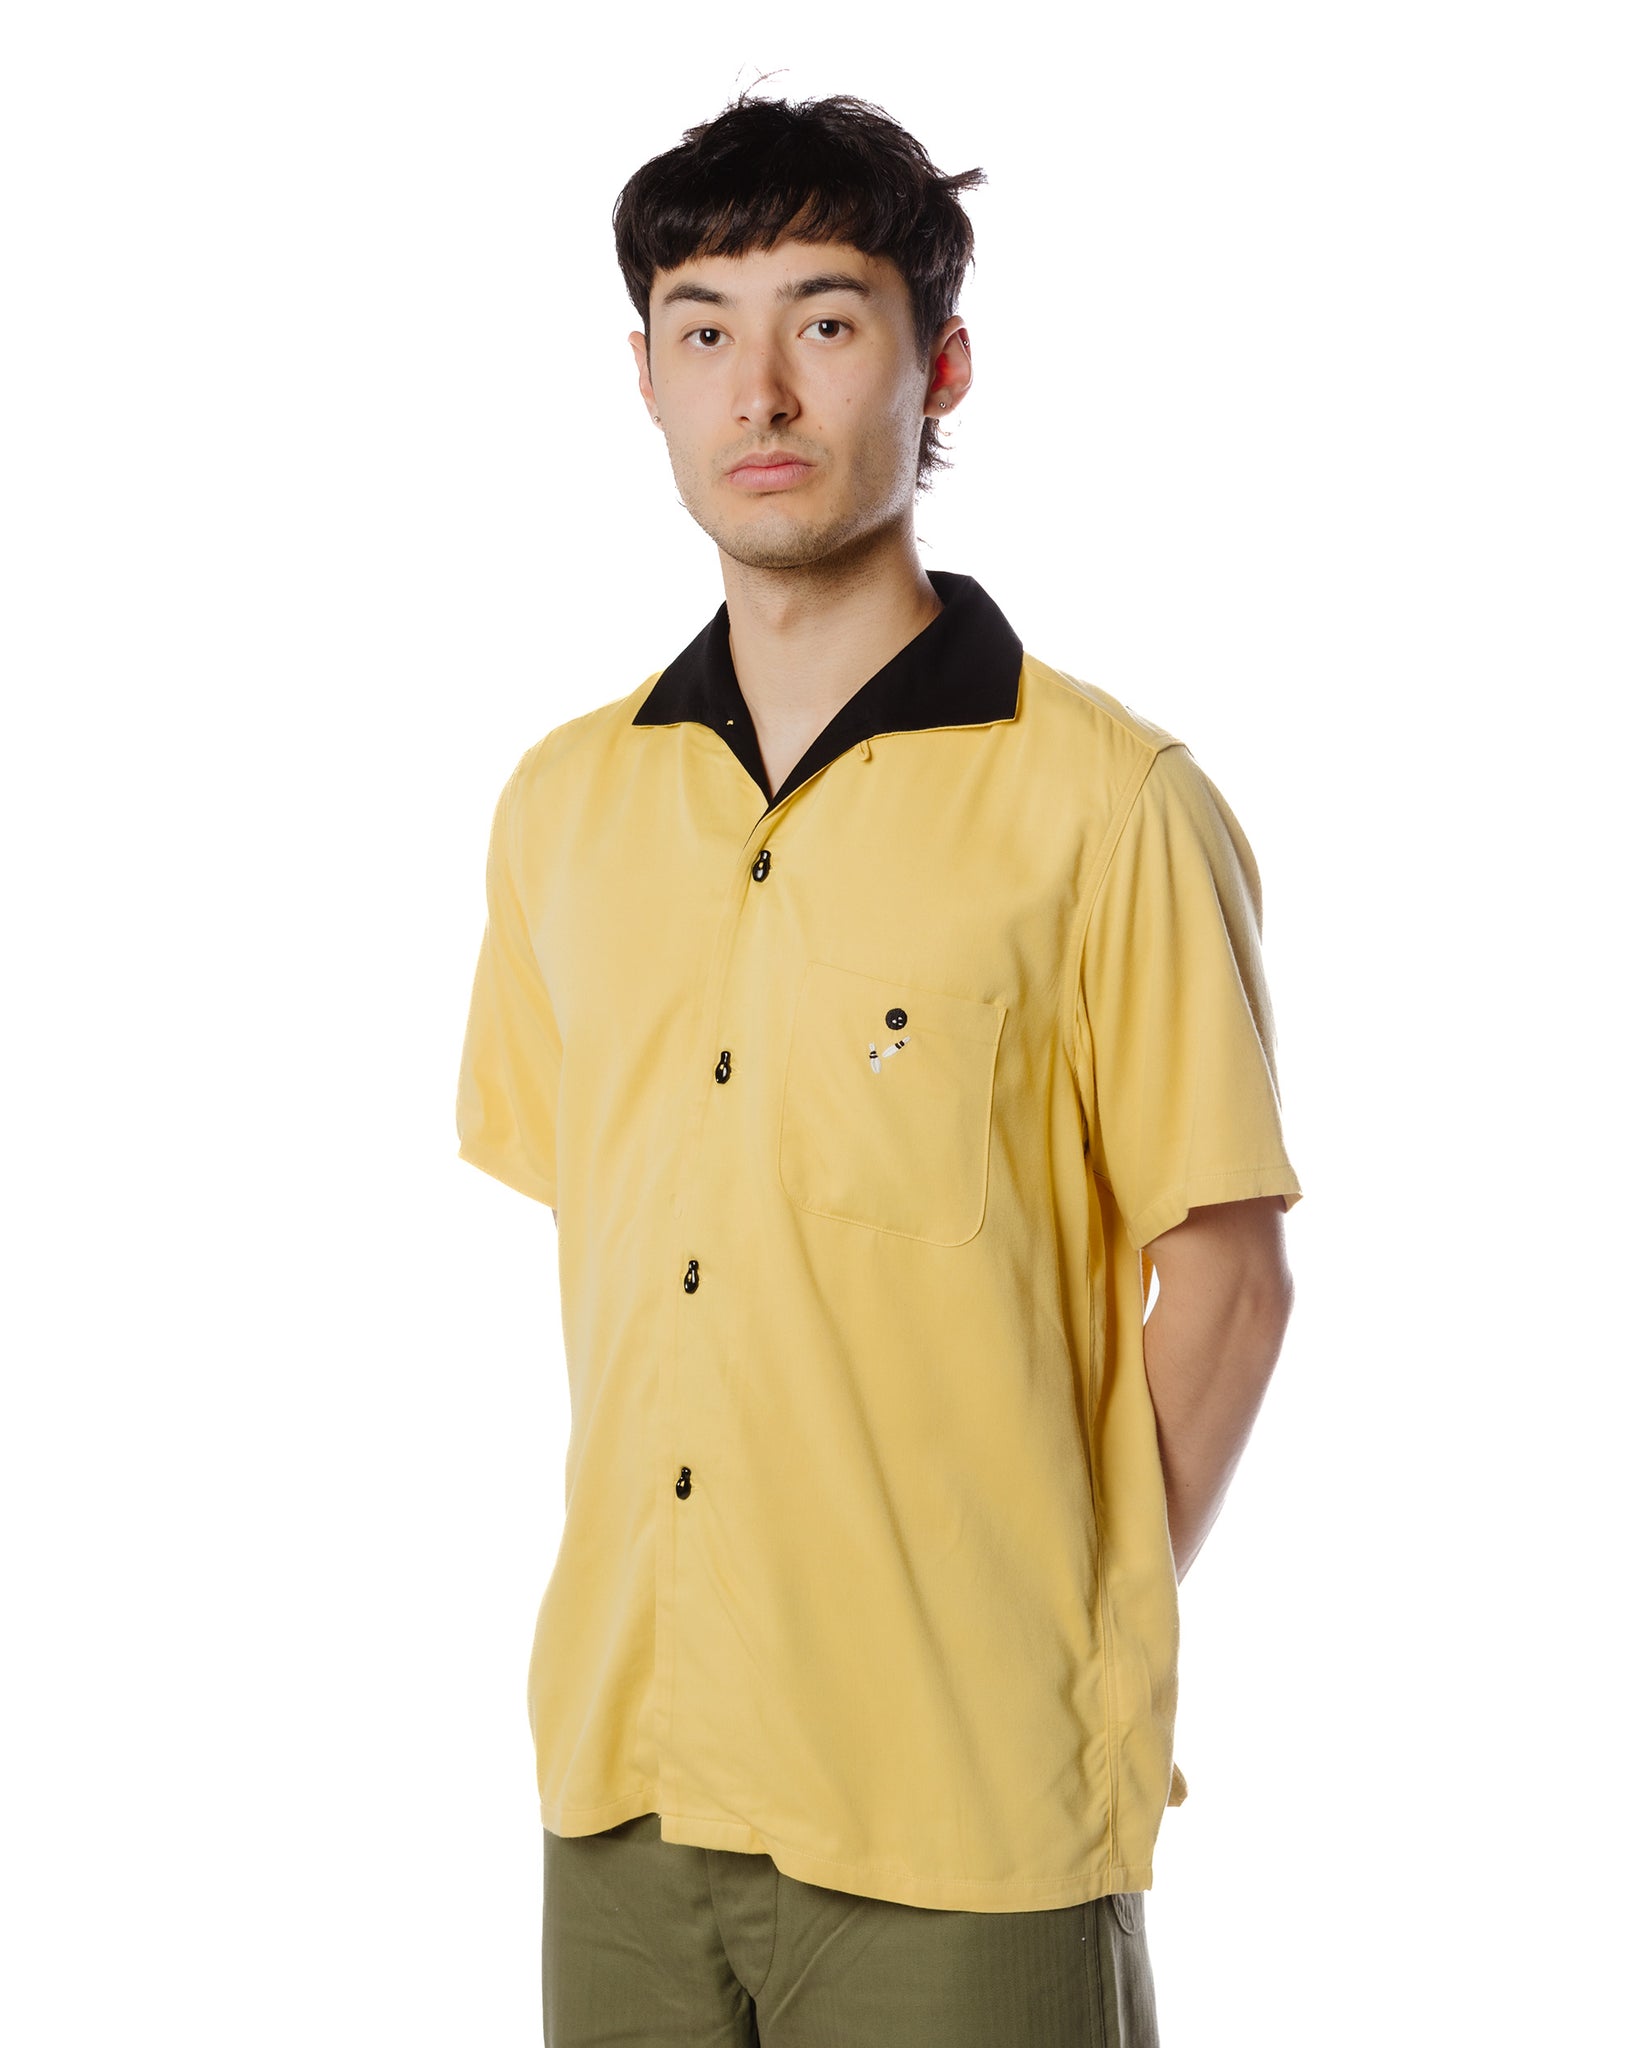 The Real McCoy's MS22002 Rayon Bowling Shirt / Jolly Roger Yellow Model Detail